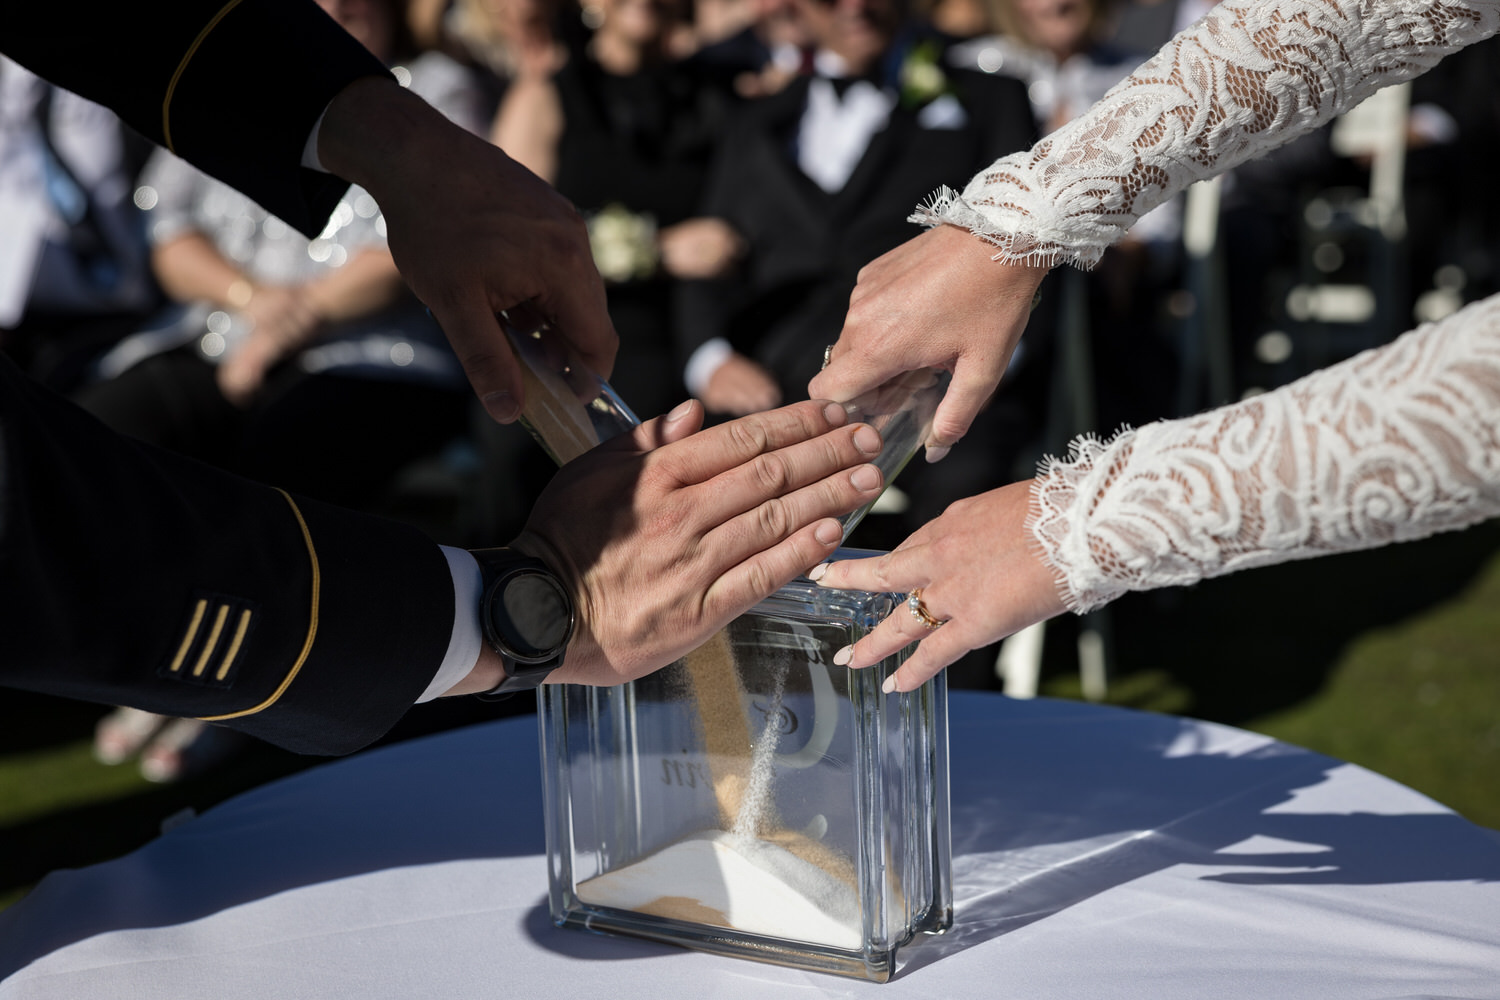 Zoomed in view of a bride and groom's hands during a unity sand ceremony.